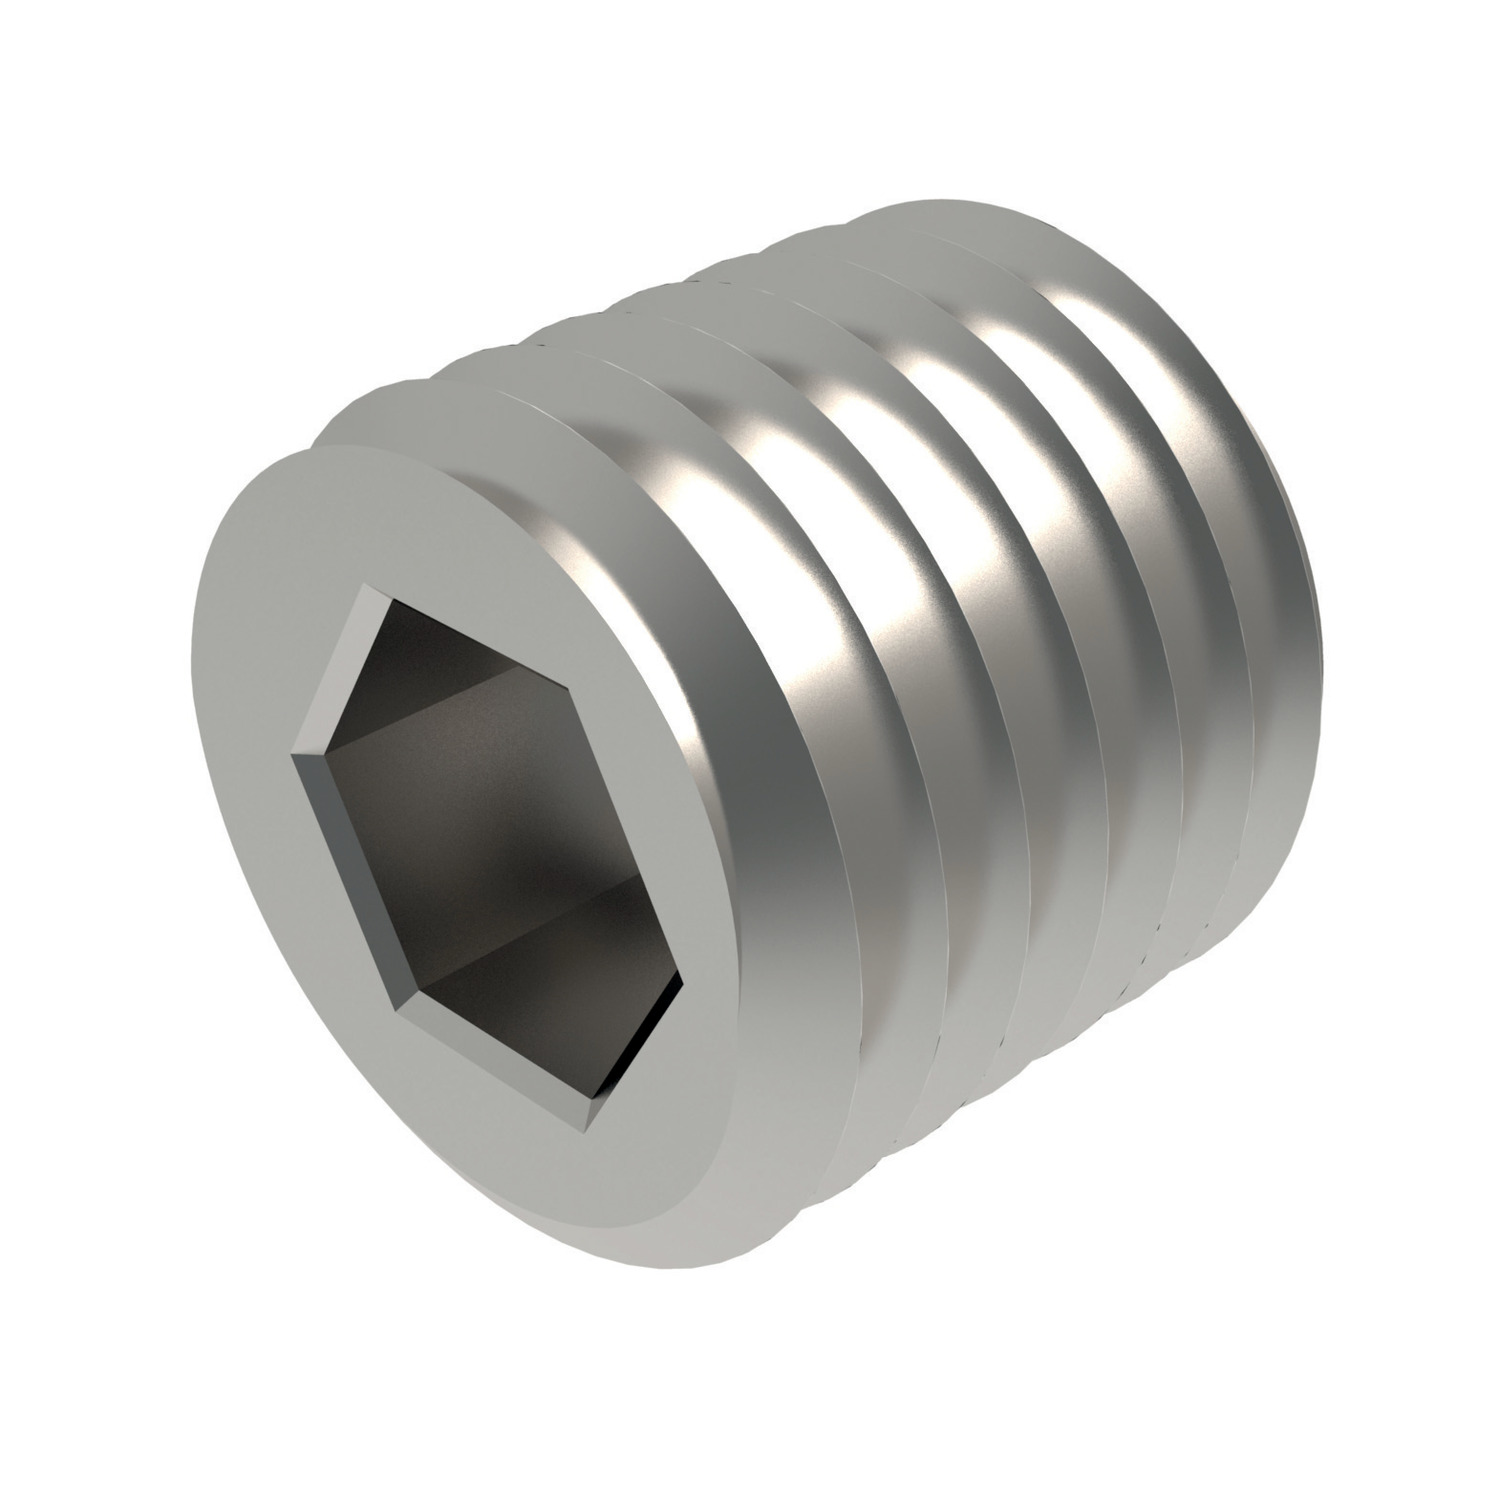 P0199.060-003-A2 Threaded Restrictor M6x1, 0.30 orifice A2 stainless steel. DANGER: Ensure this part is installed according to instructions in the product data sheet and installation notes. Holes must be completely free of oil, grease and debris.